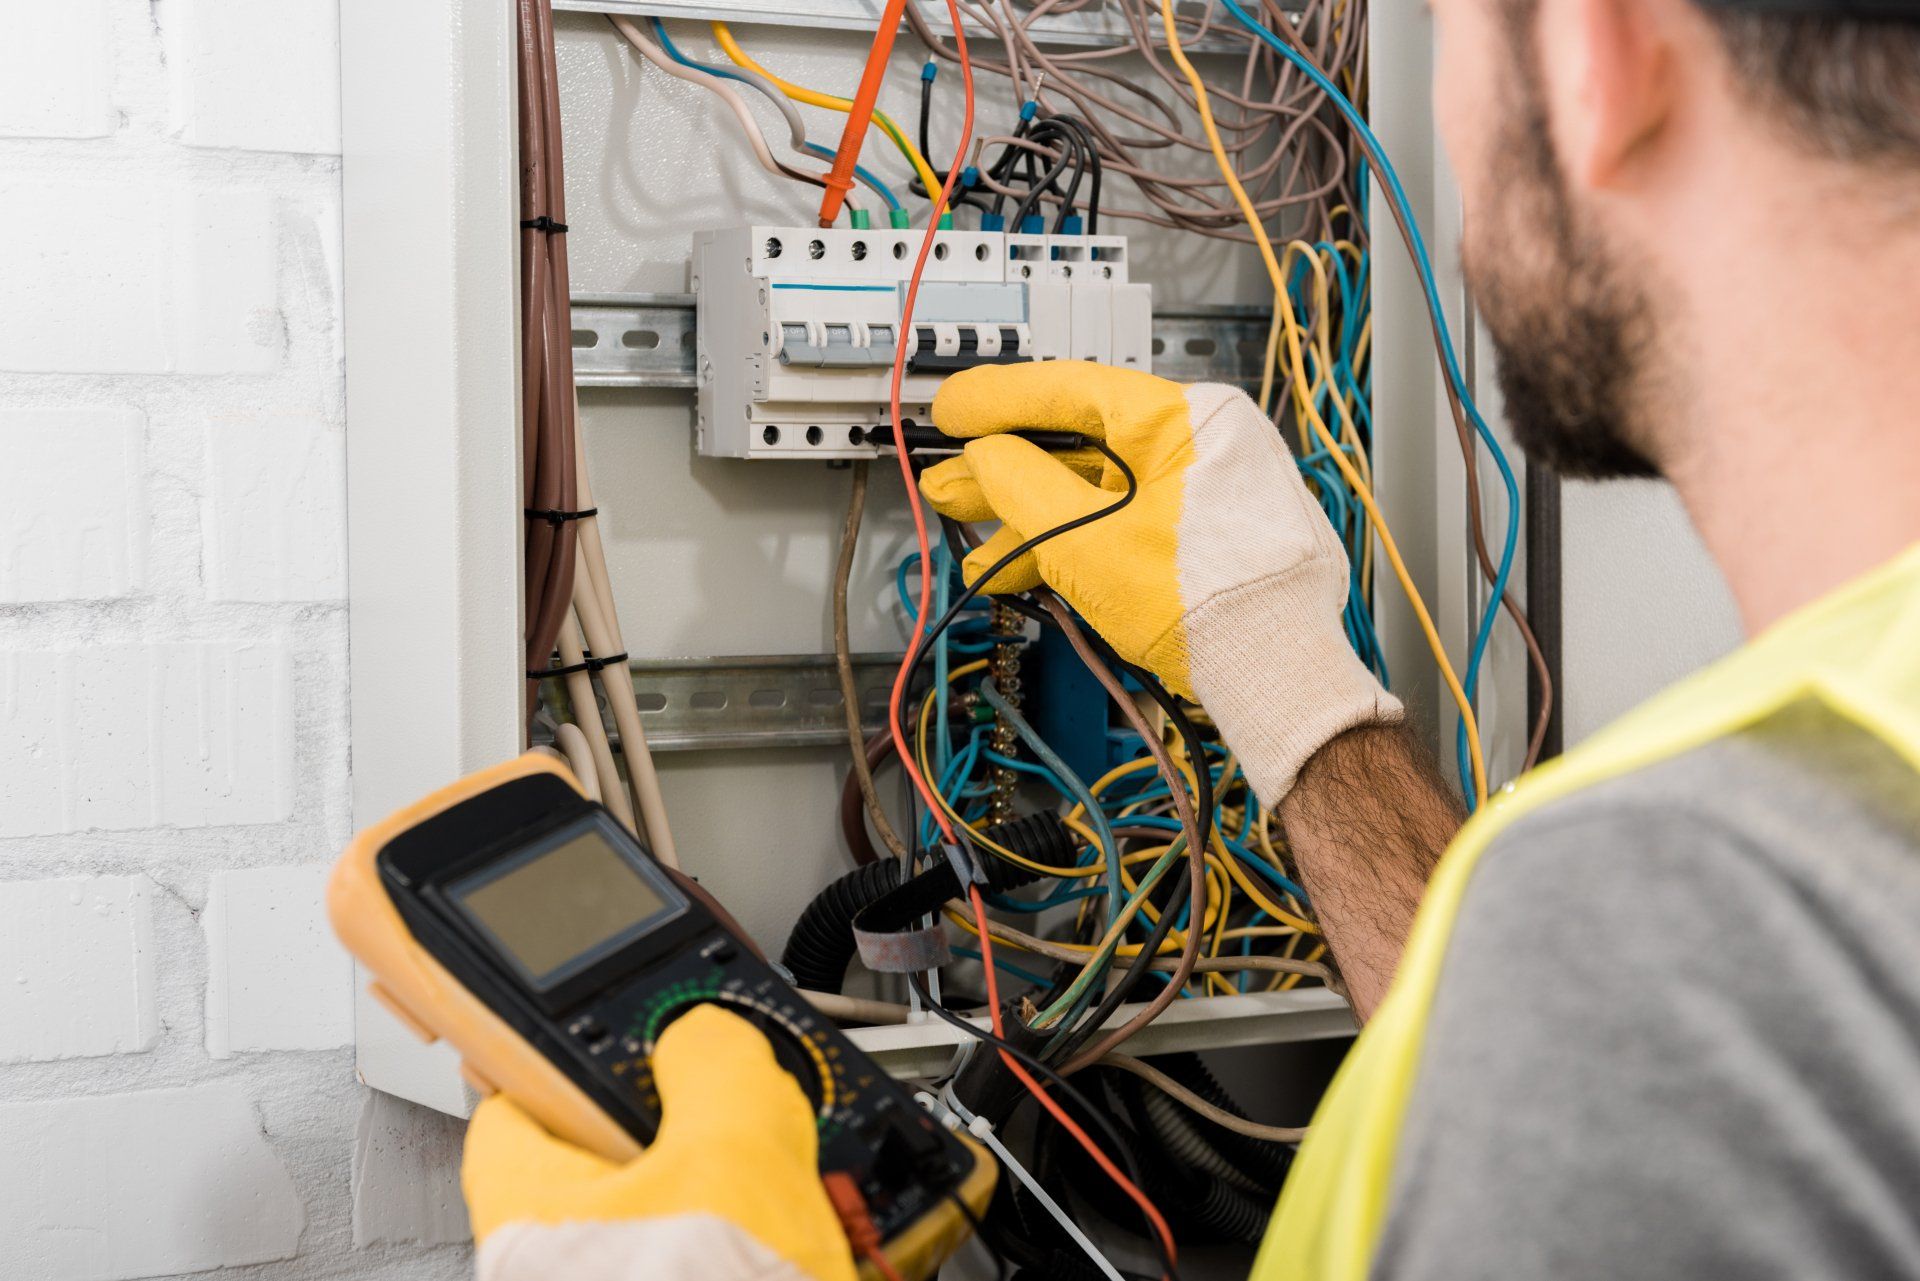 A worker checks the current of a breaker in an electrical panel